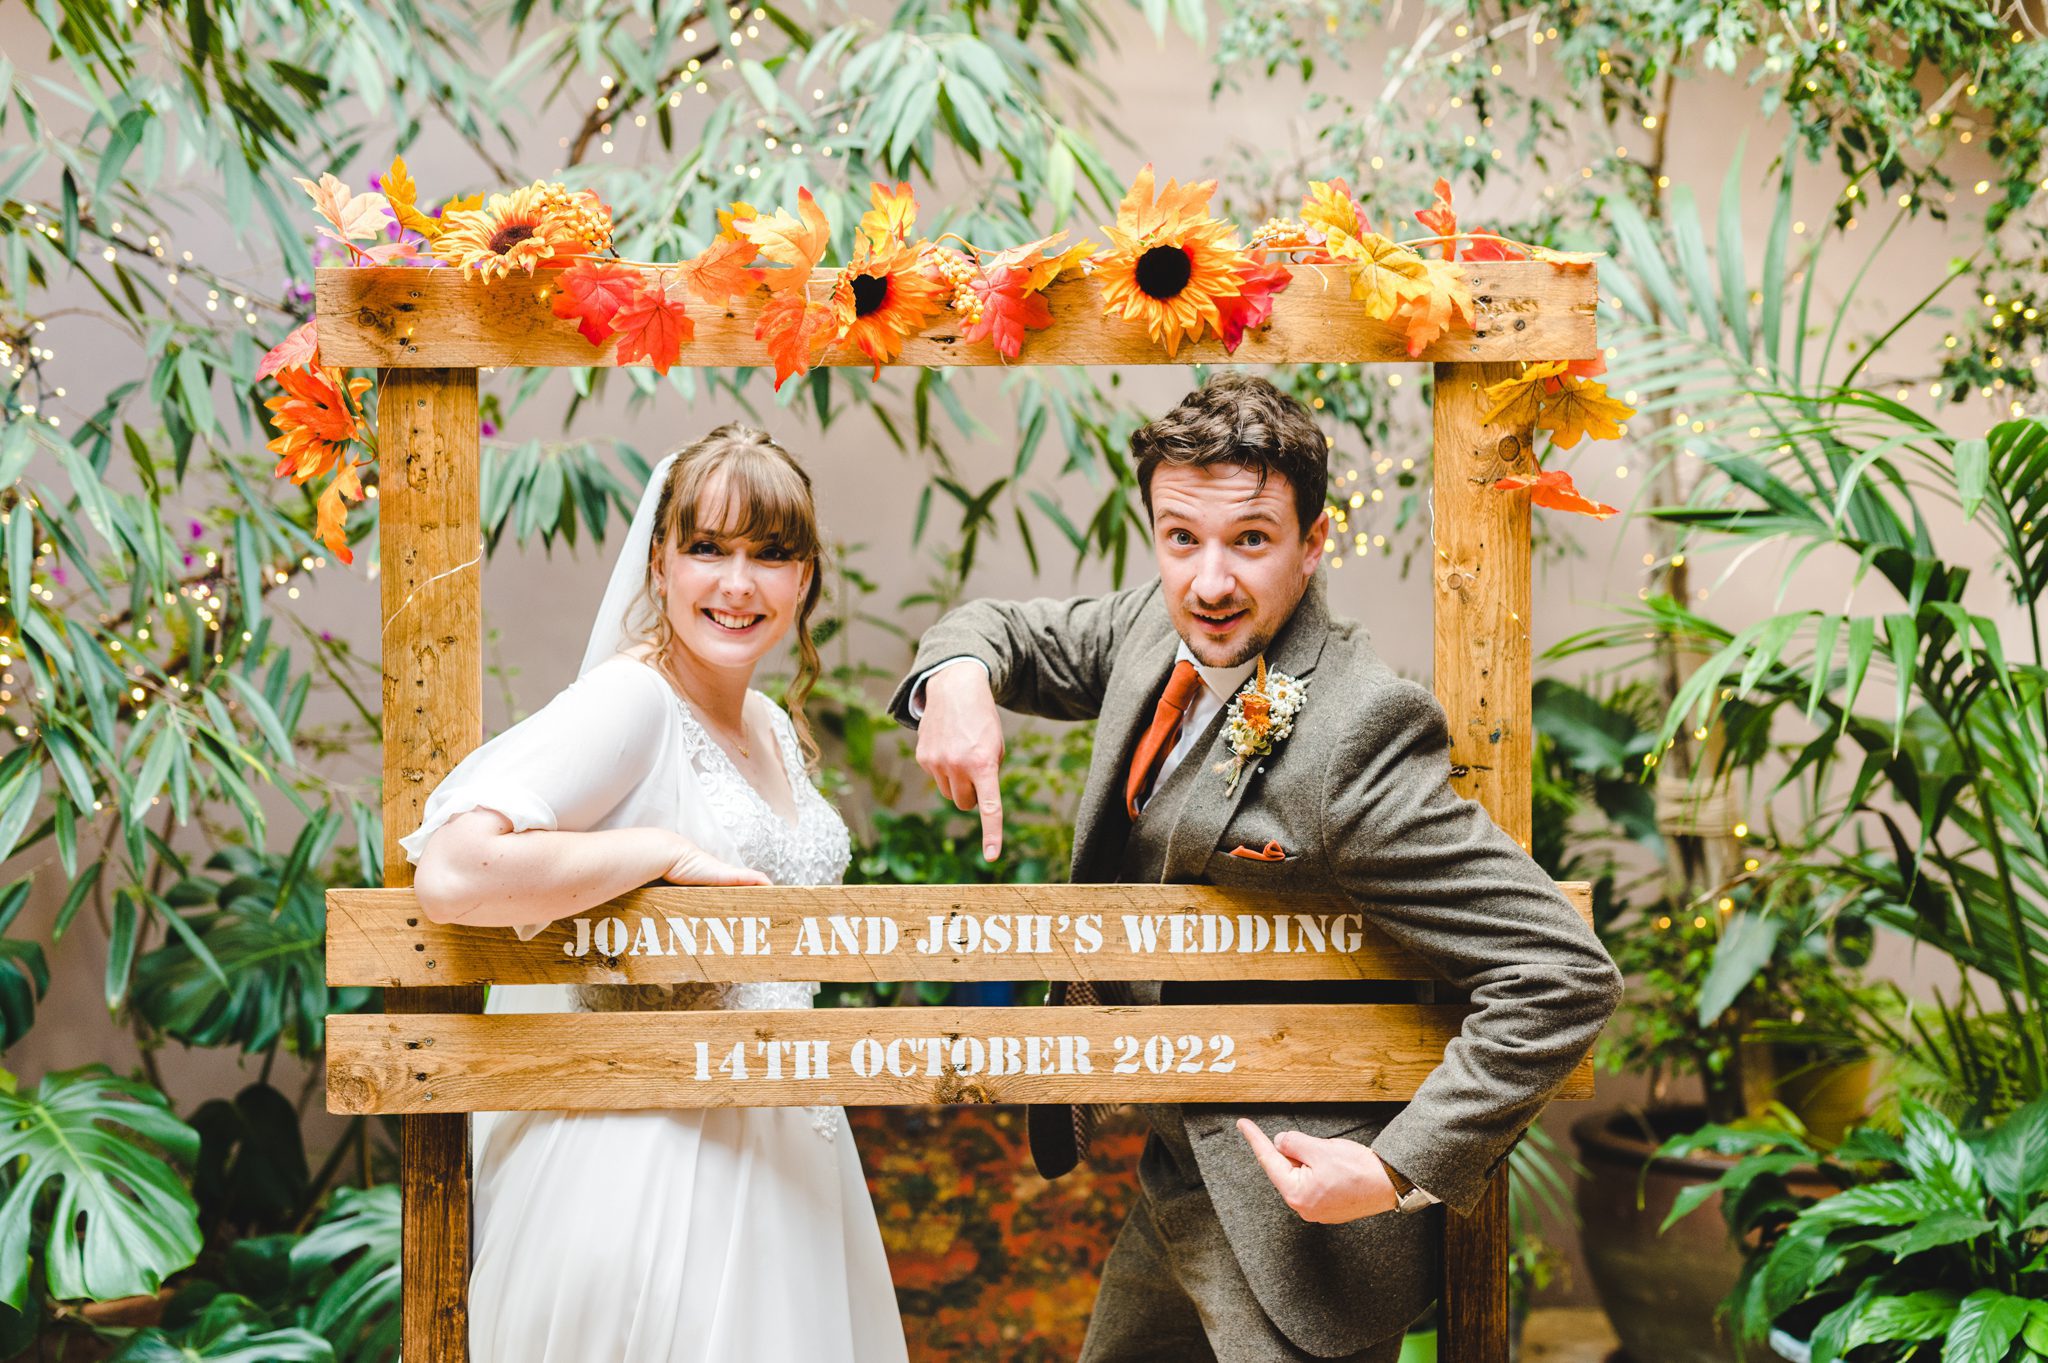 A couple posing in front of their wedding sign